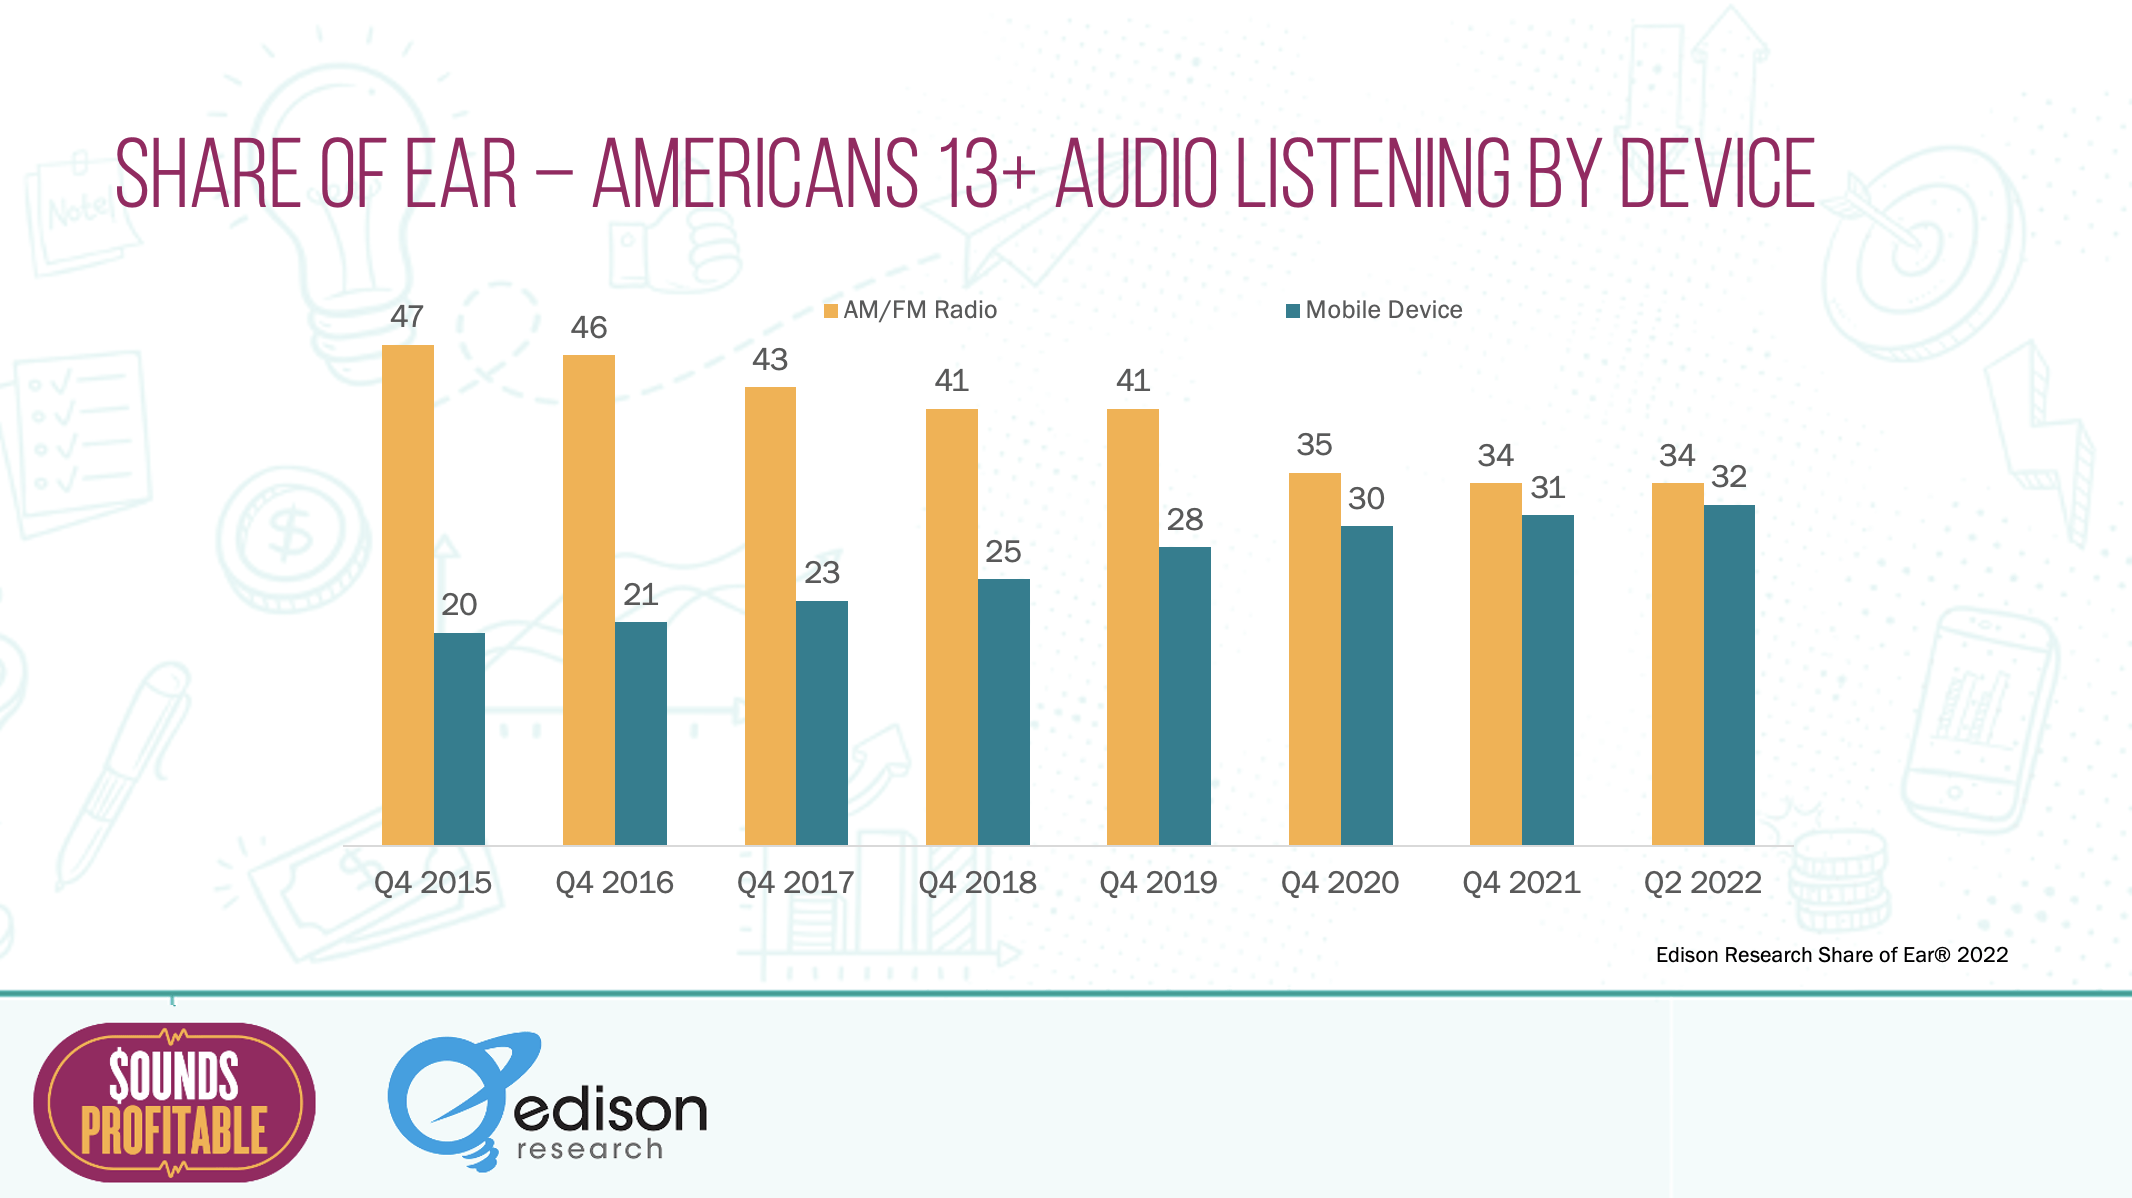 Share of Ear listening devices